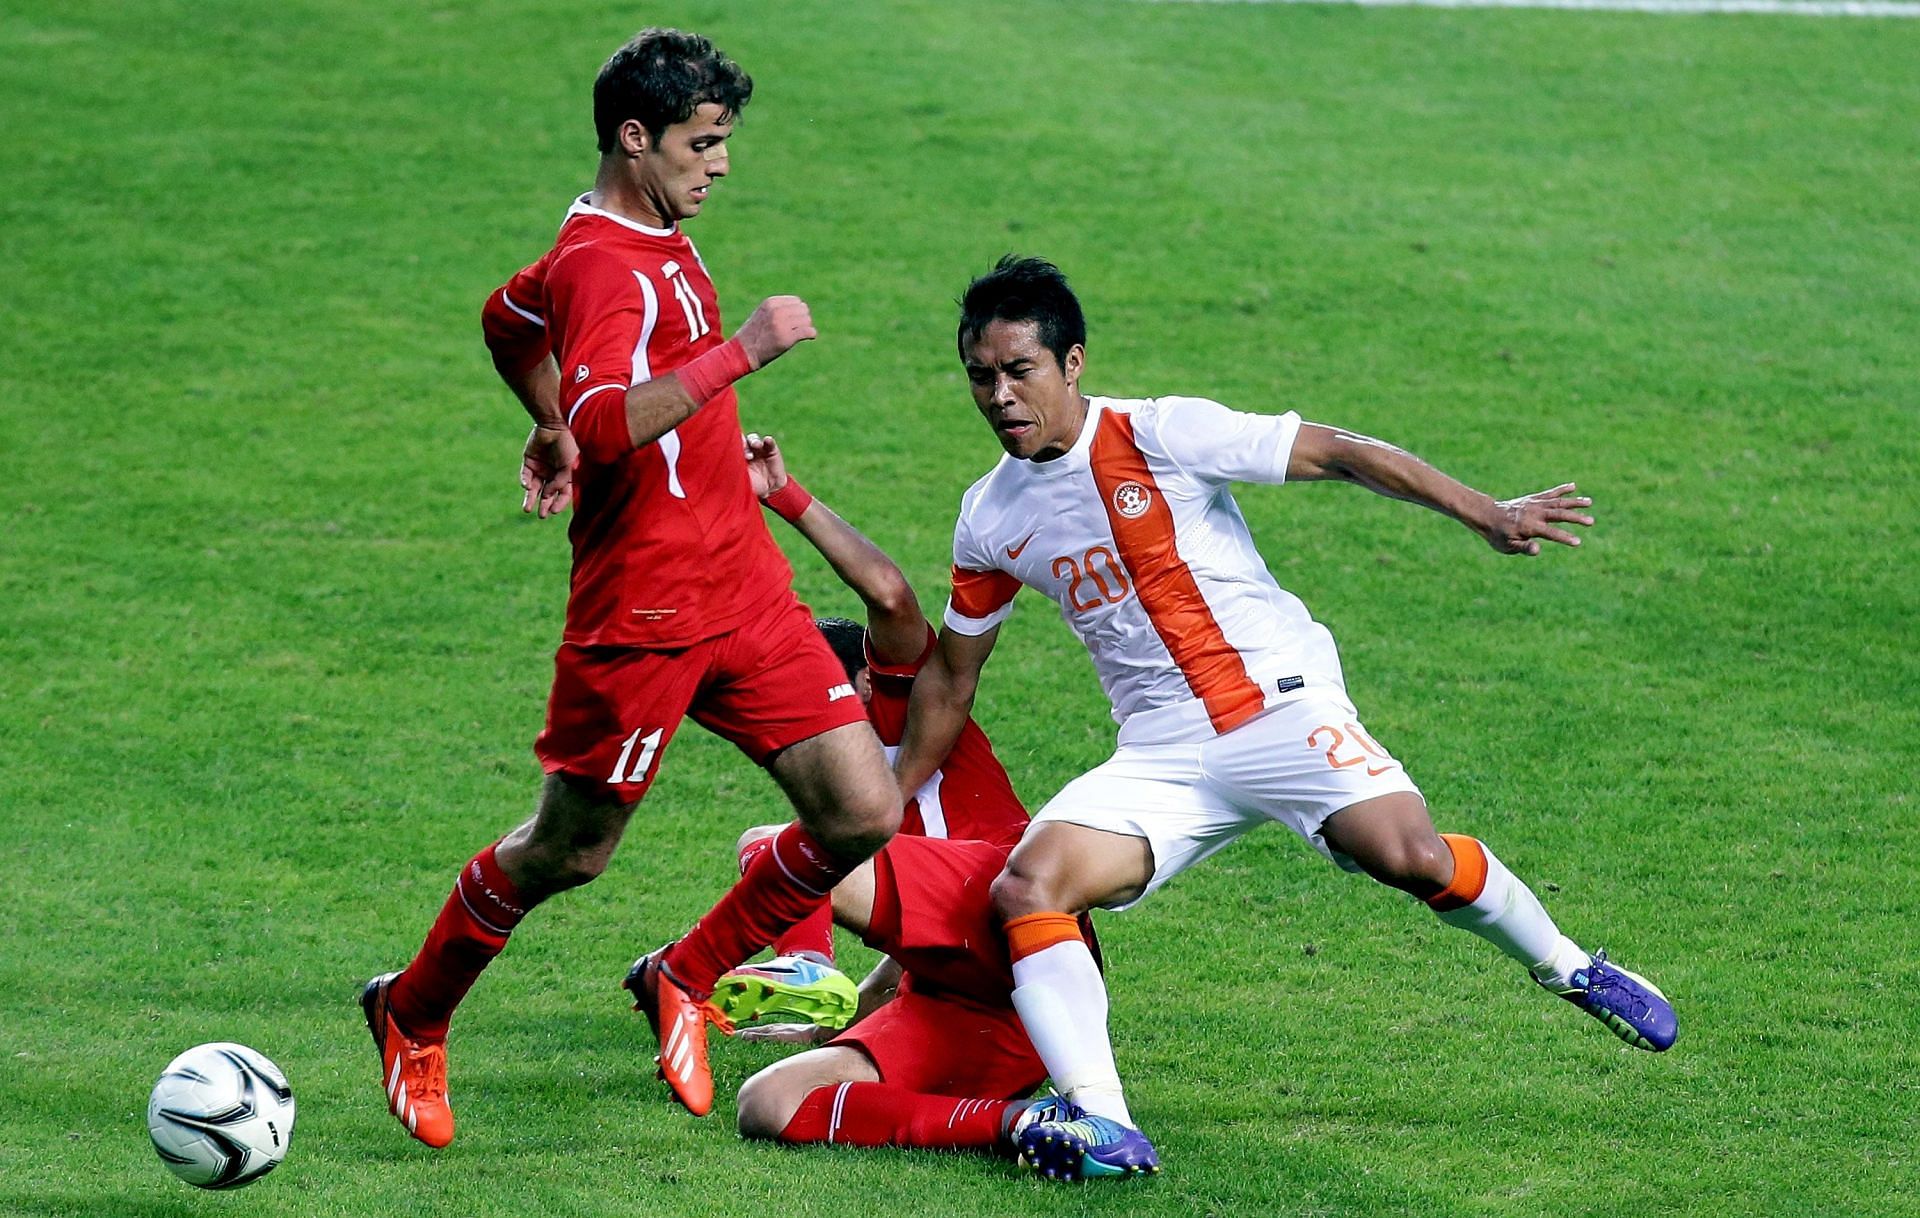 Lalrindika Ralte against Jordan in the 2014 Asian Games. (Image Courtesy: Getty Images)